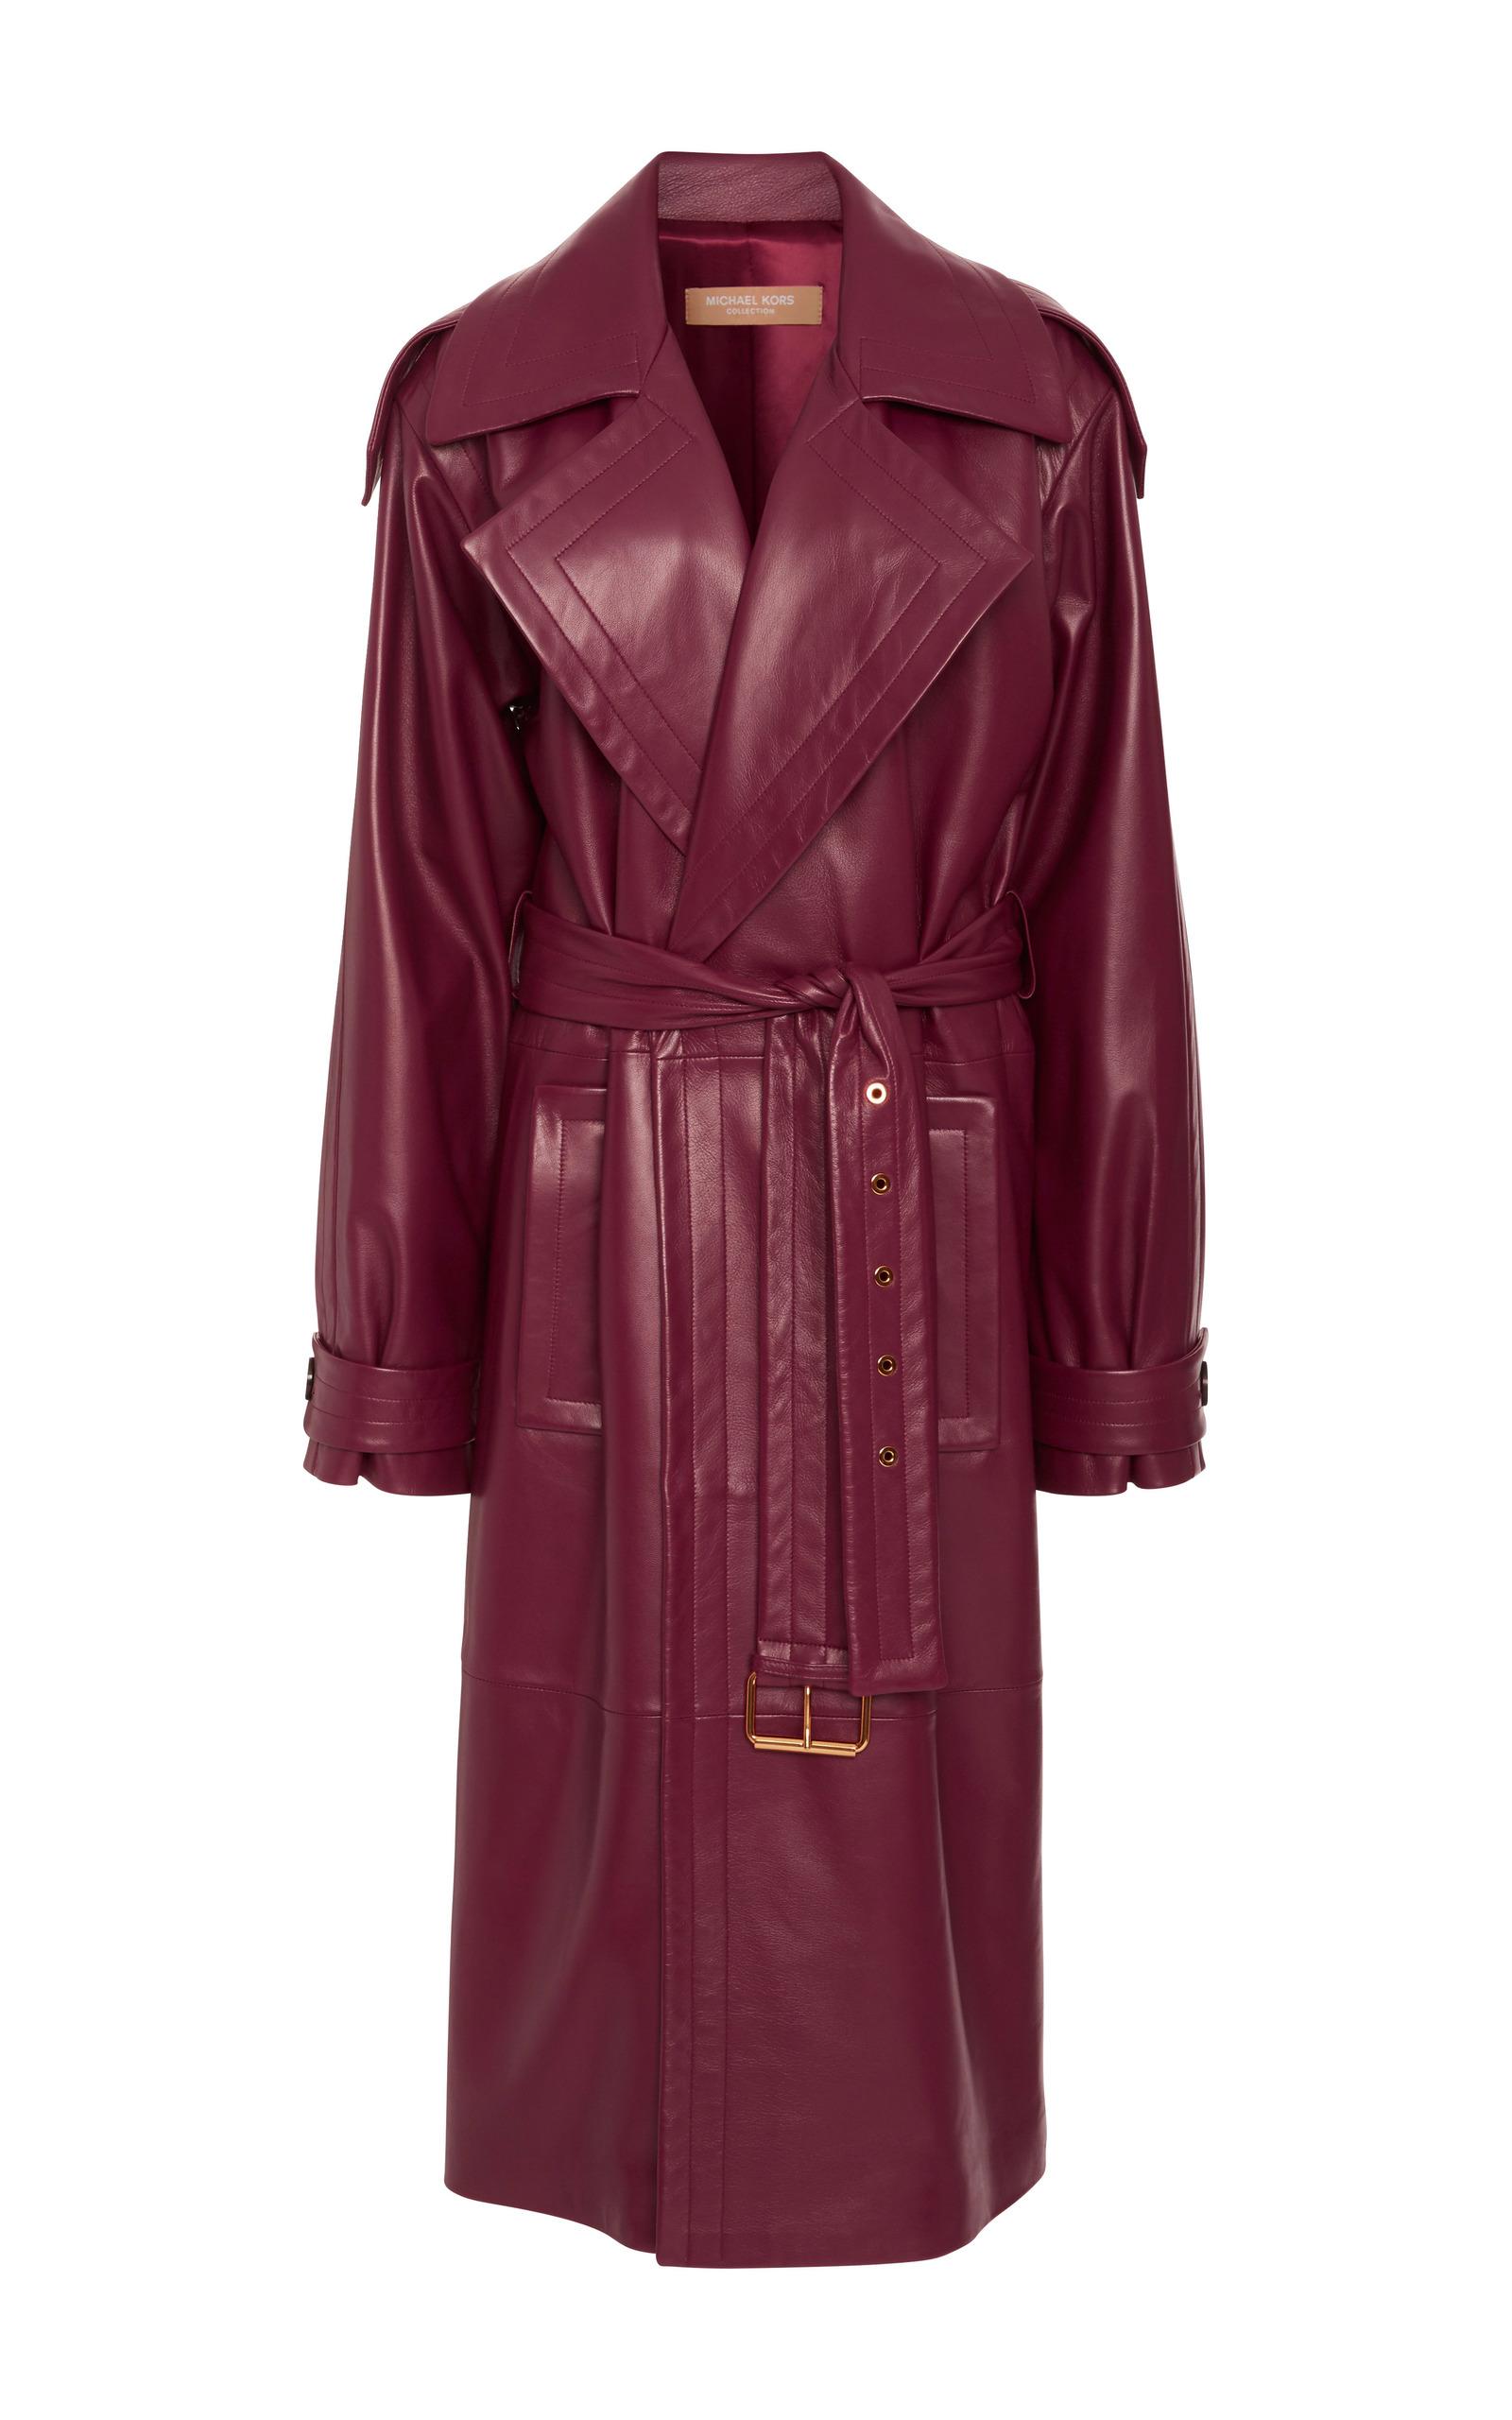 Michael Kors Oversized Leather Trench Coat in Burgundy (Red) - Lyst